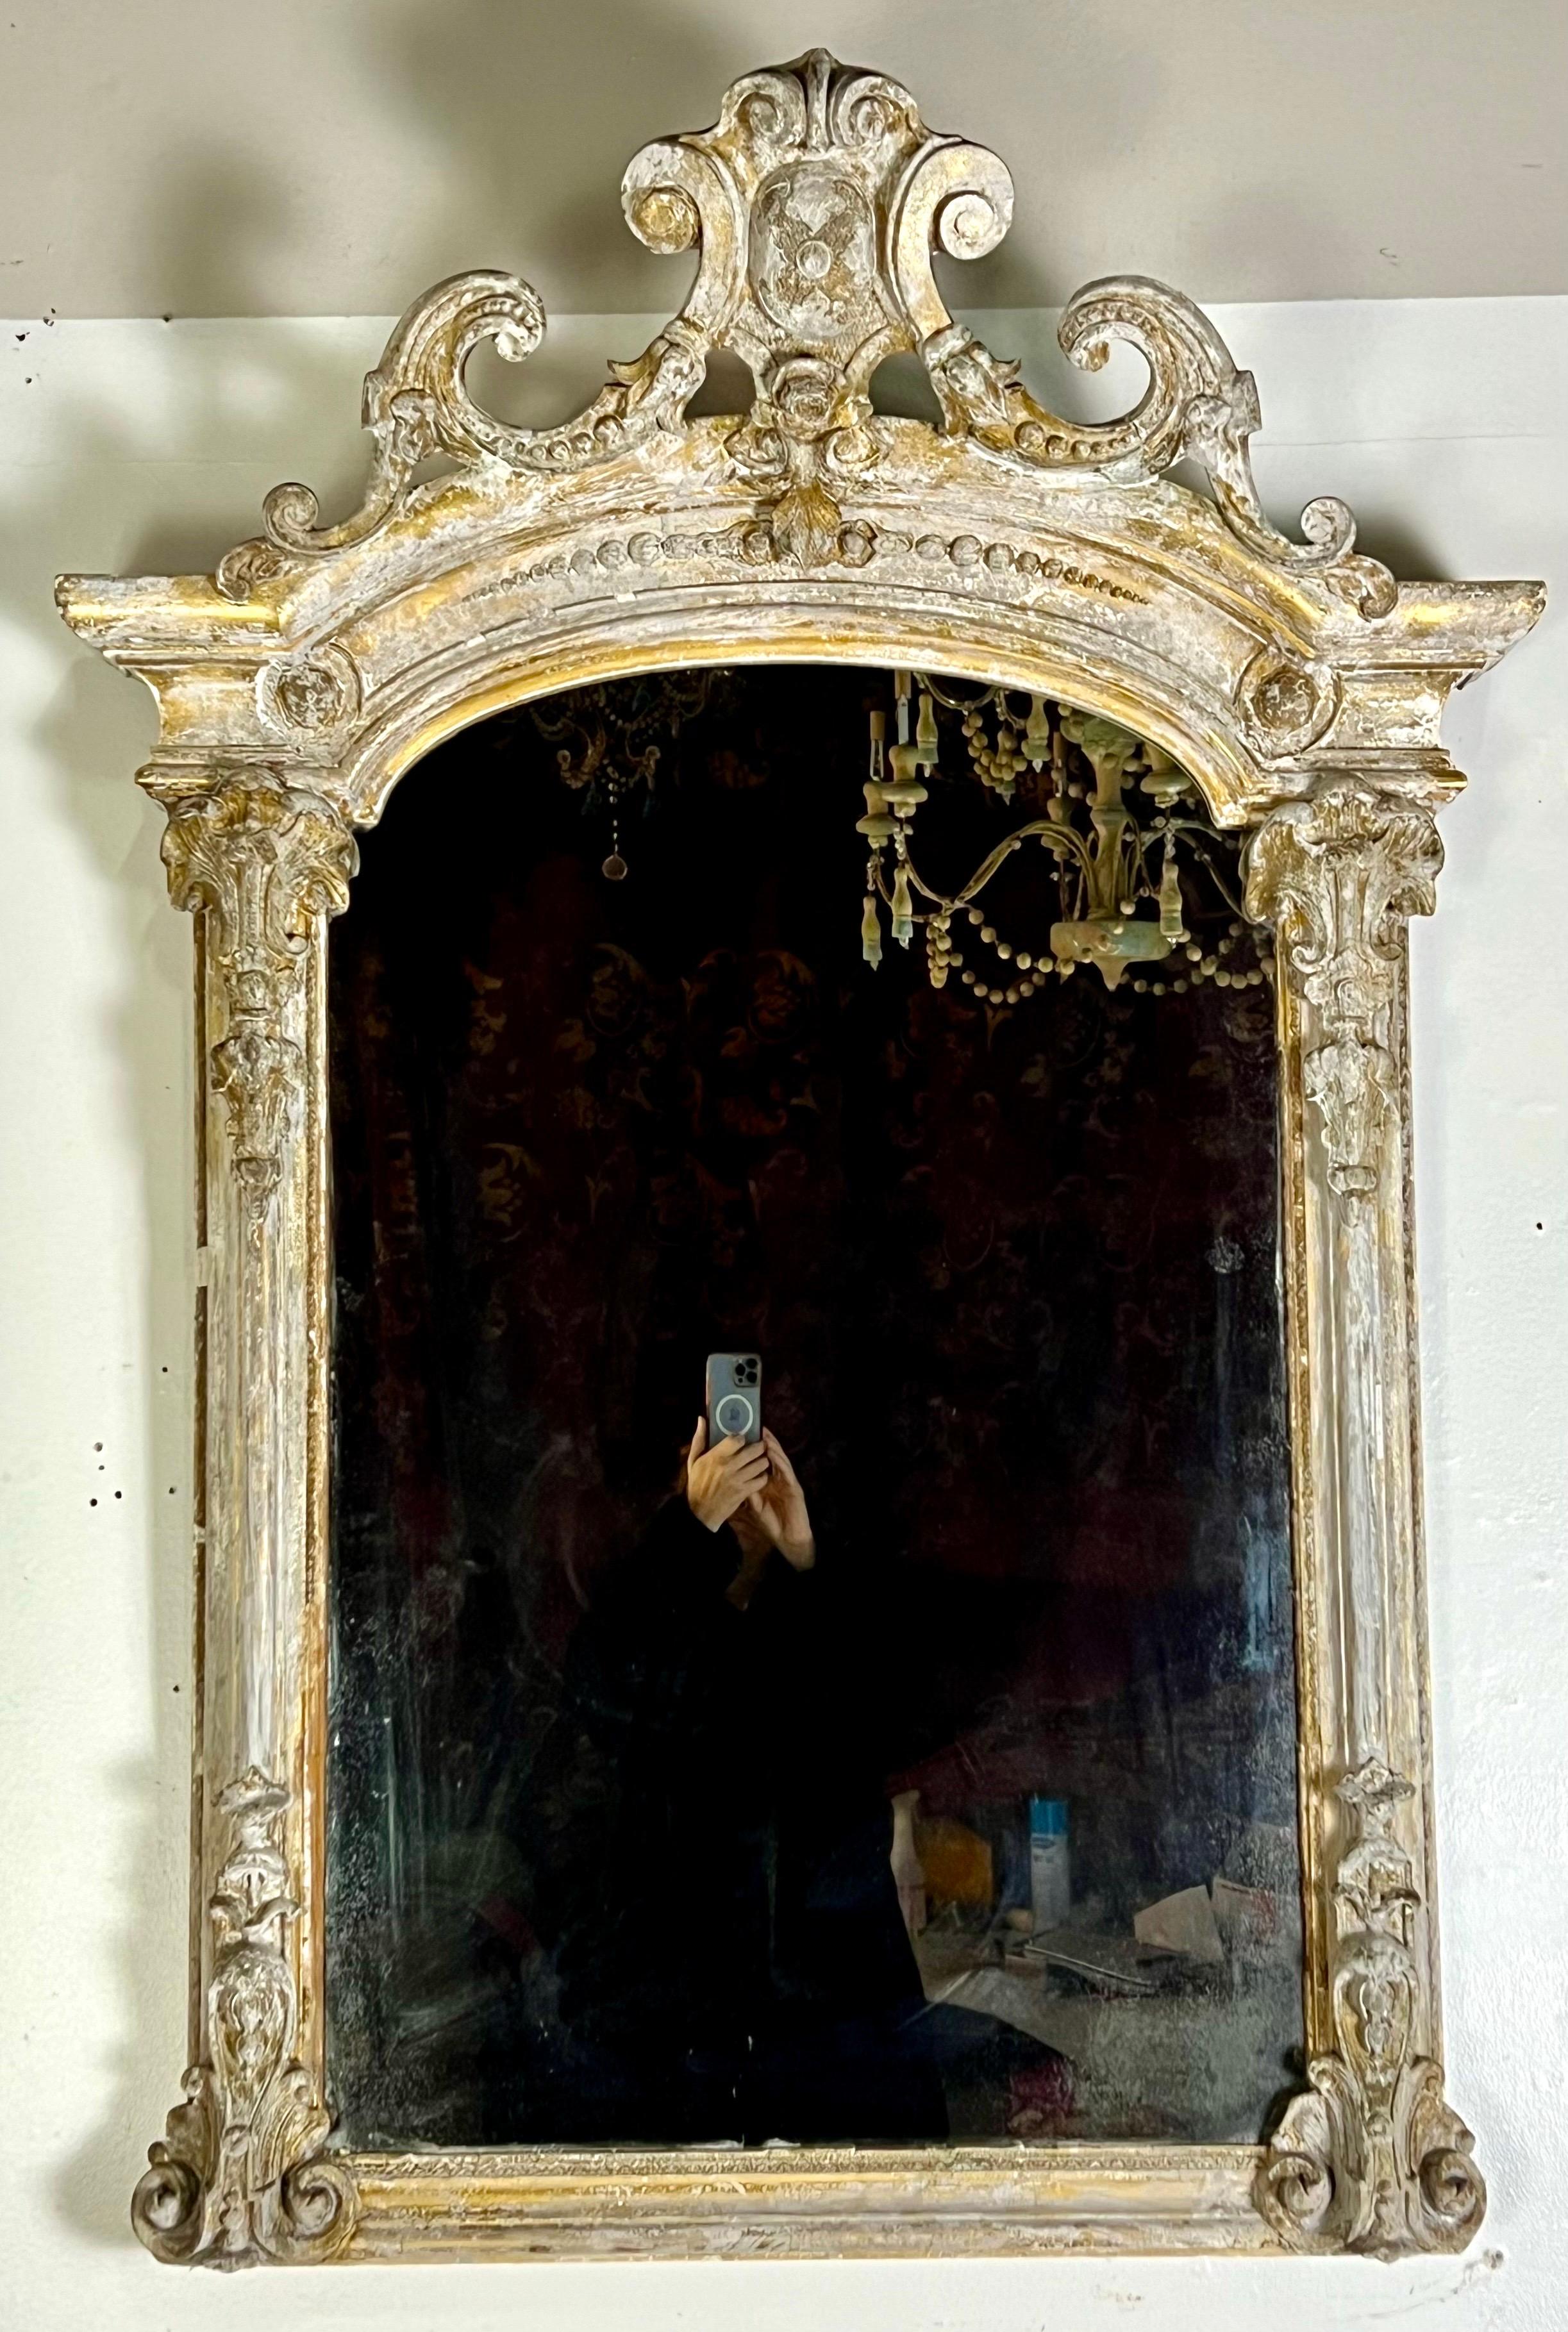 Ornate 19th C. French Rococo style painted & parcel gilt mirror characterized by its elaborate scrollwork and floral motifs. The painted finish is distressed and there is gold leaf remnants throughout the frame.